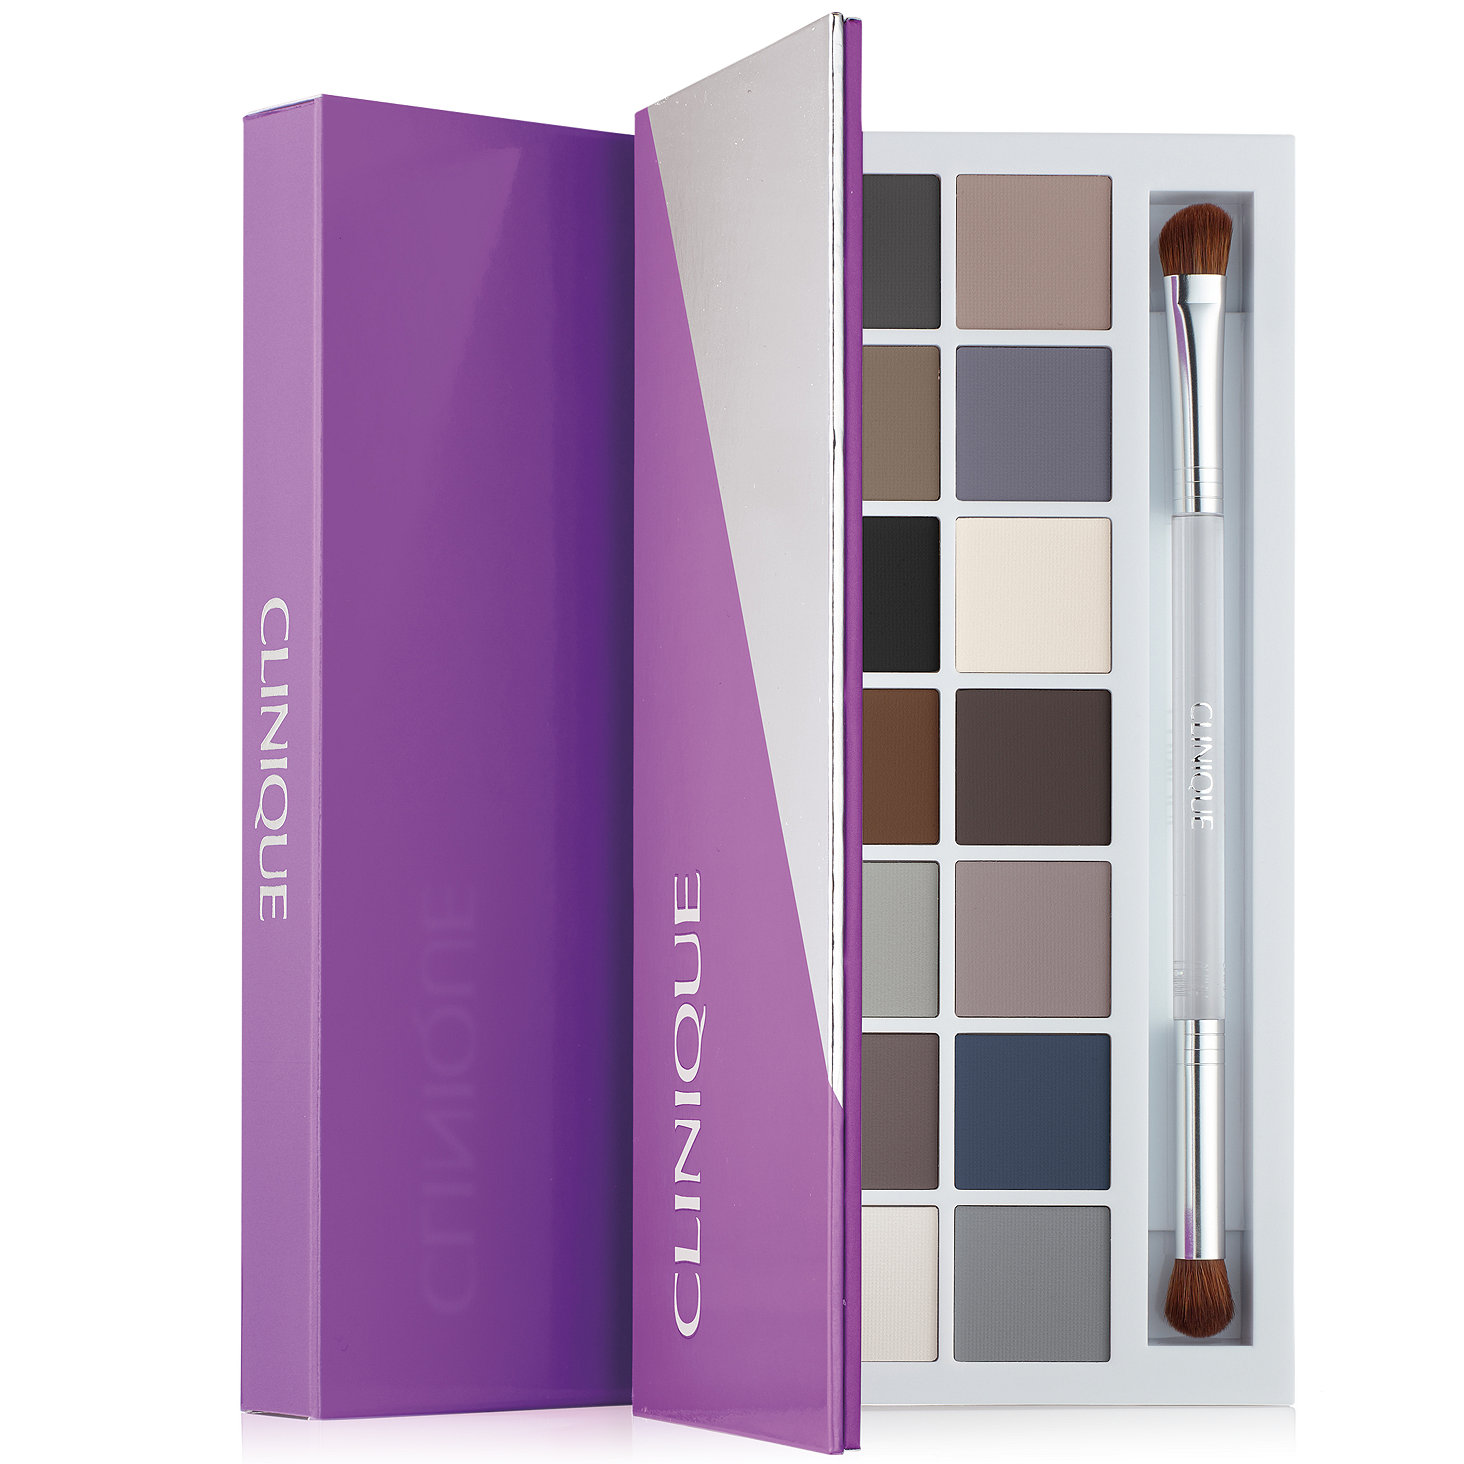 Clinique Party Eyes Palette Only $25.00 Shipped!